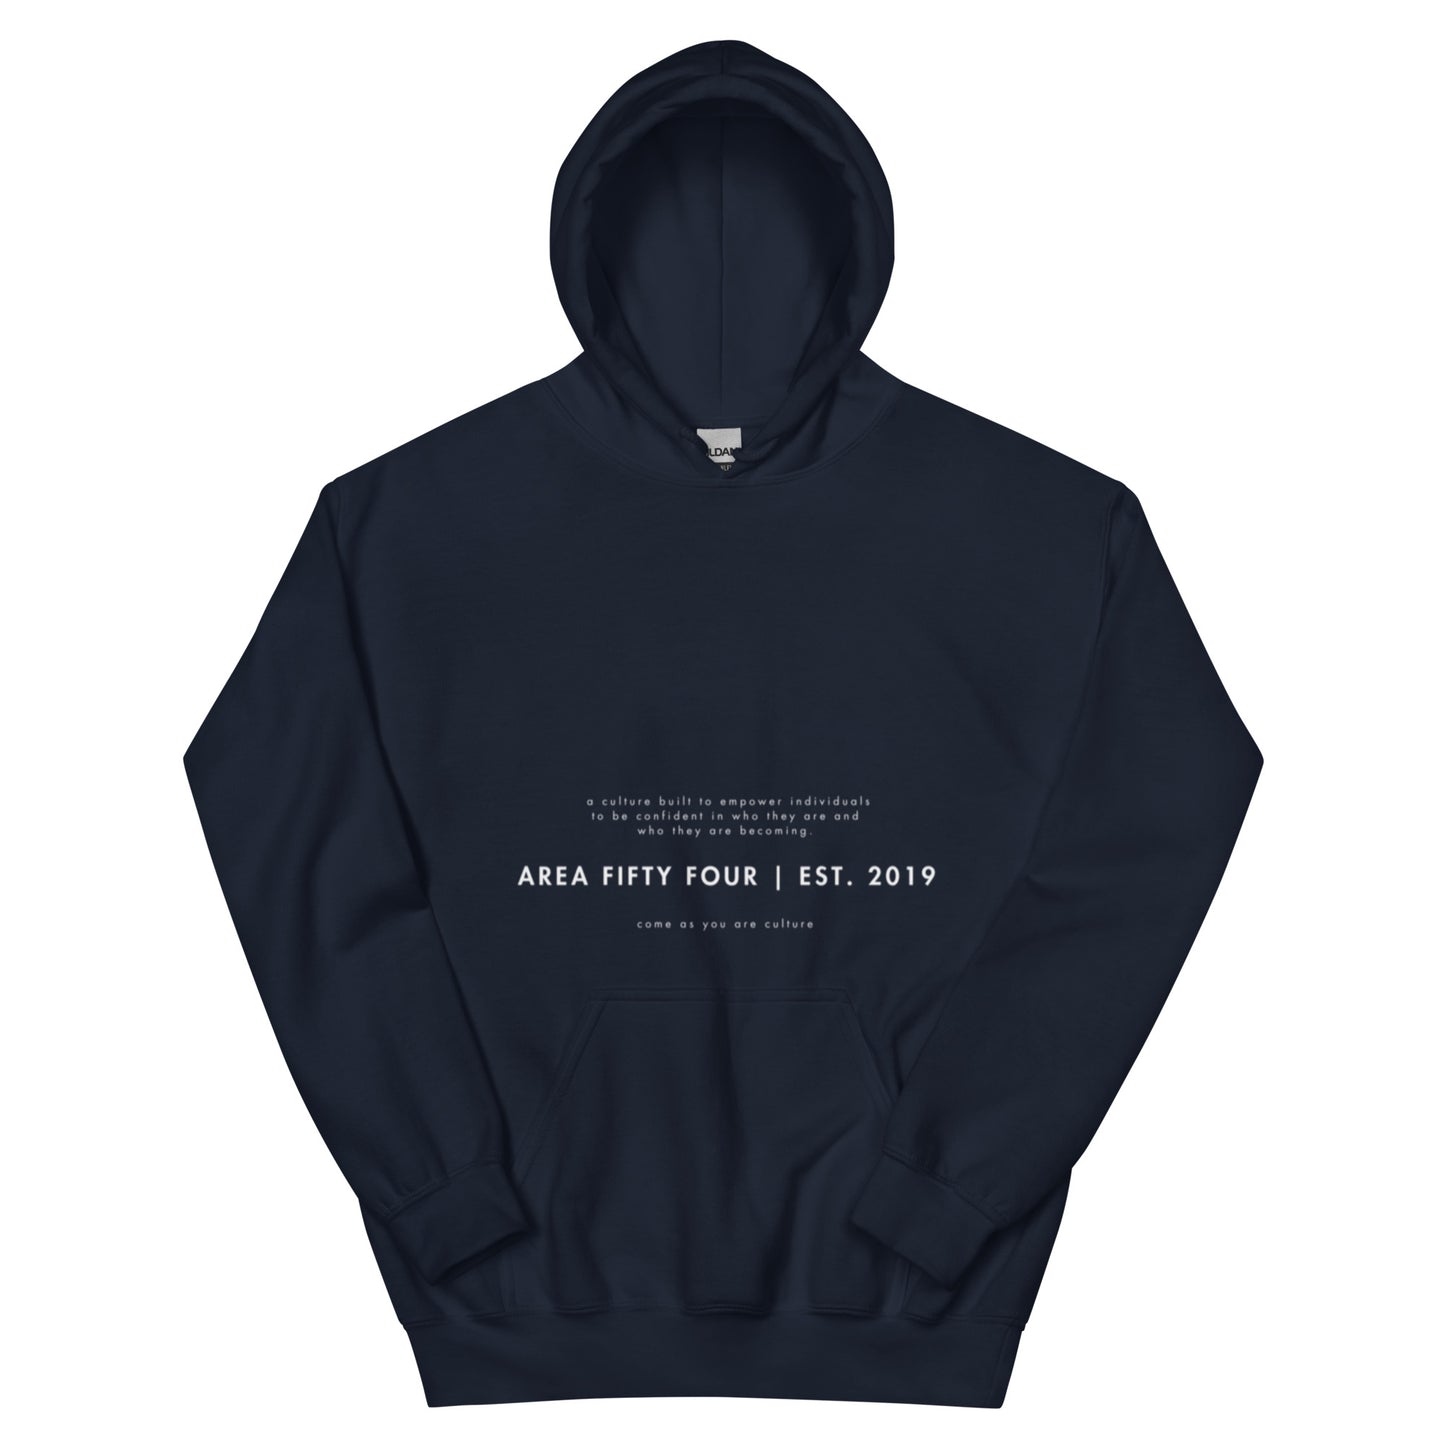 A54 Official Hoodie in Navy